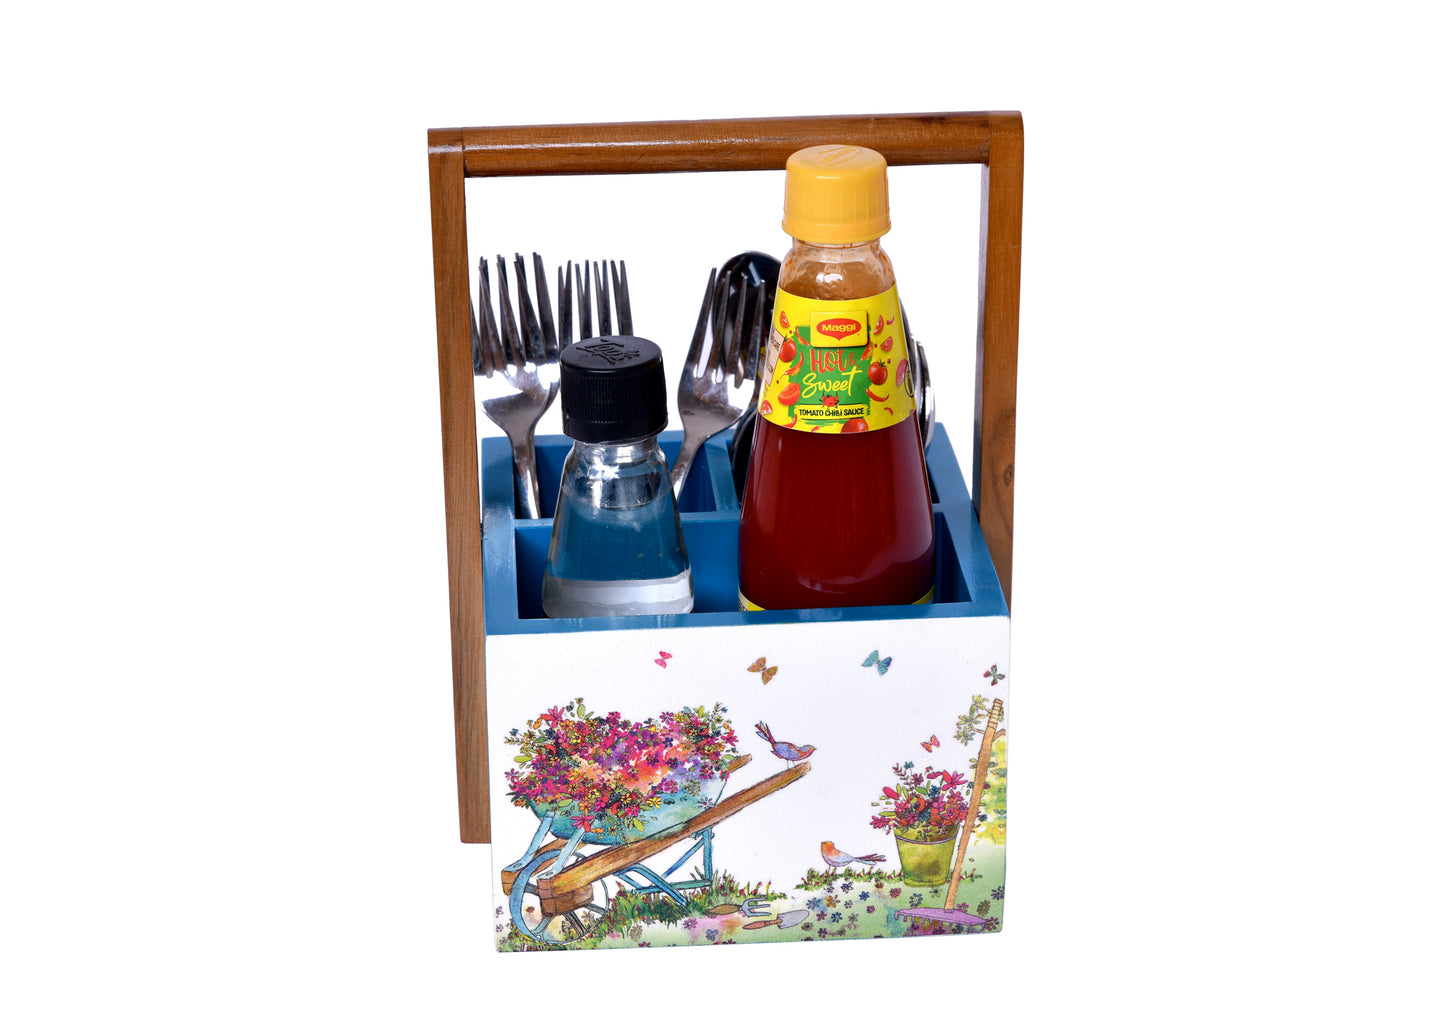 The Weaver's Nest Spoon Stand Cutlery Holder and Table Organizer with Storage for Kitchen and Dining Table